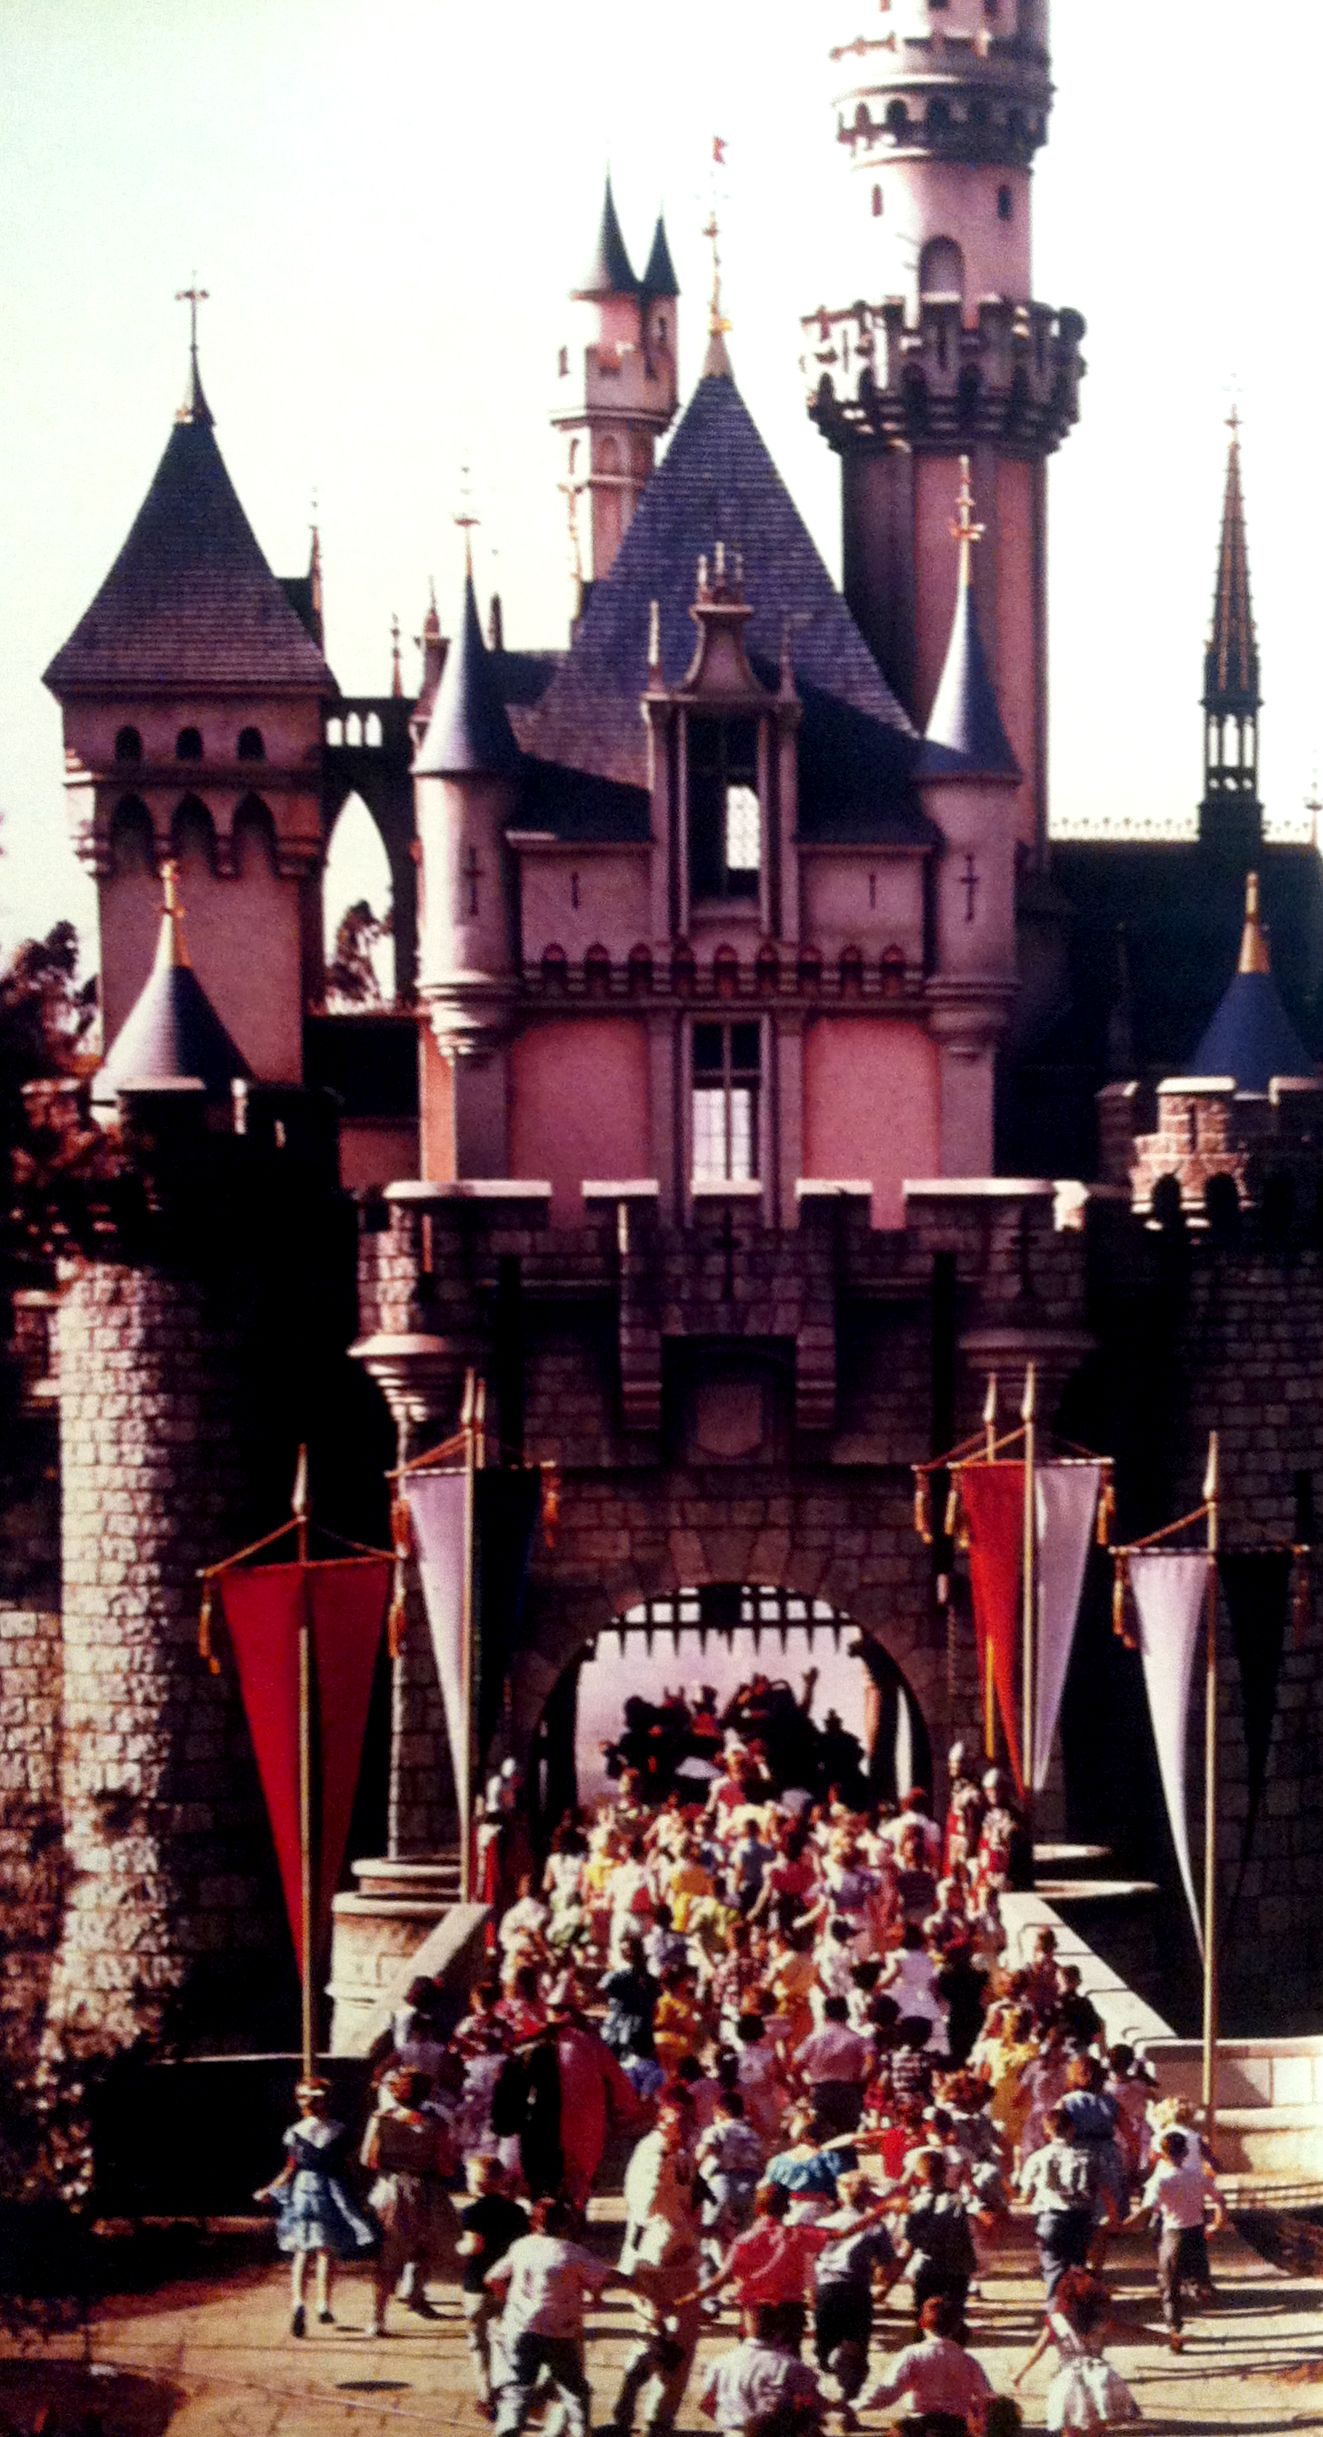 Crowds rush through the castle on Disneyland's opening day in 1955.